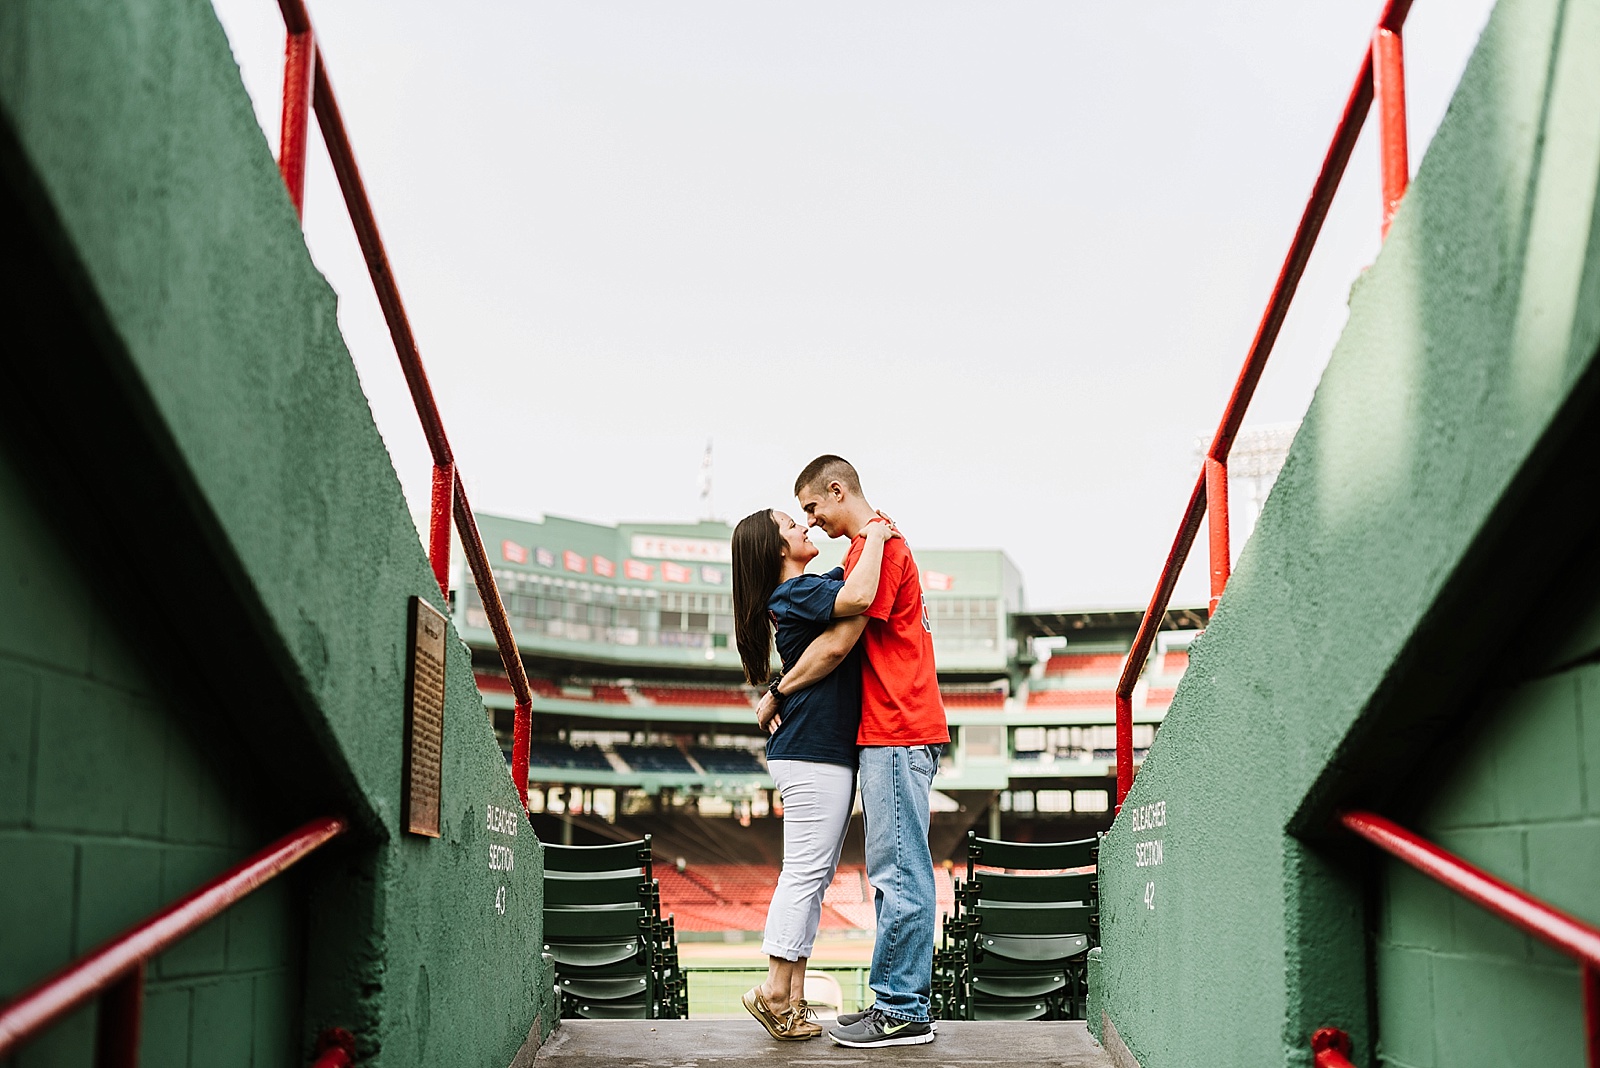 Playful Fenway Park Engagement Session Photos by Boston Wedding Photographer Annmarie Swift